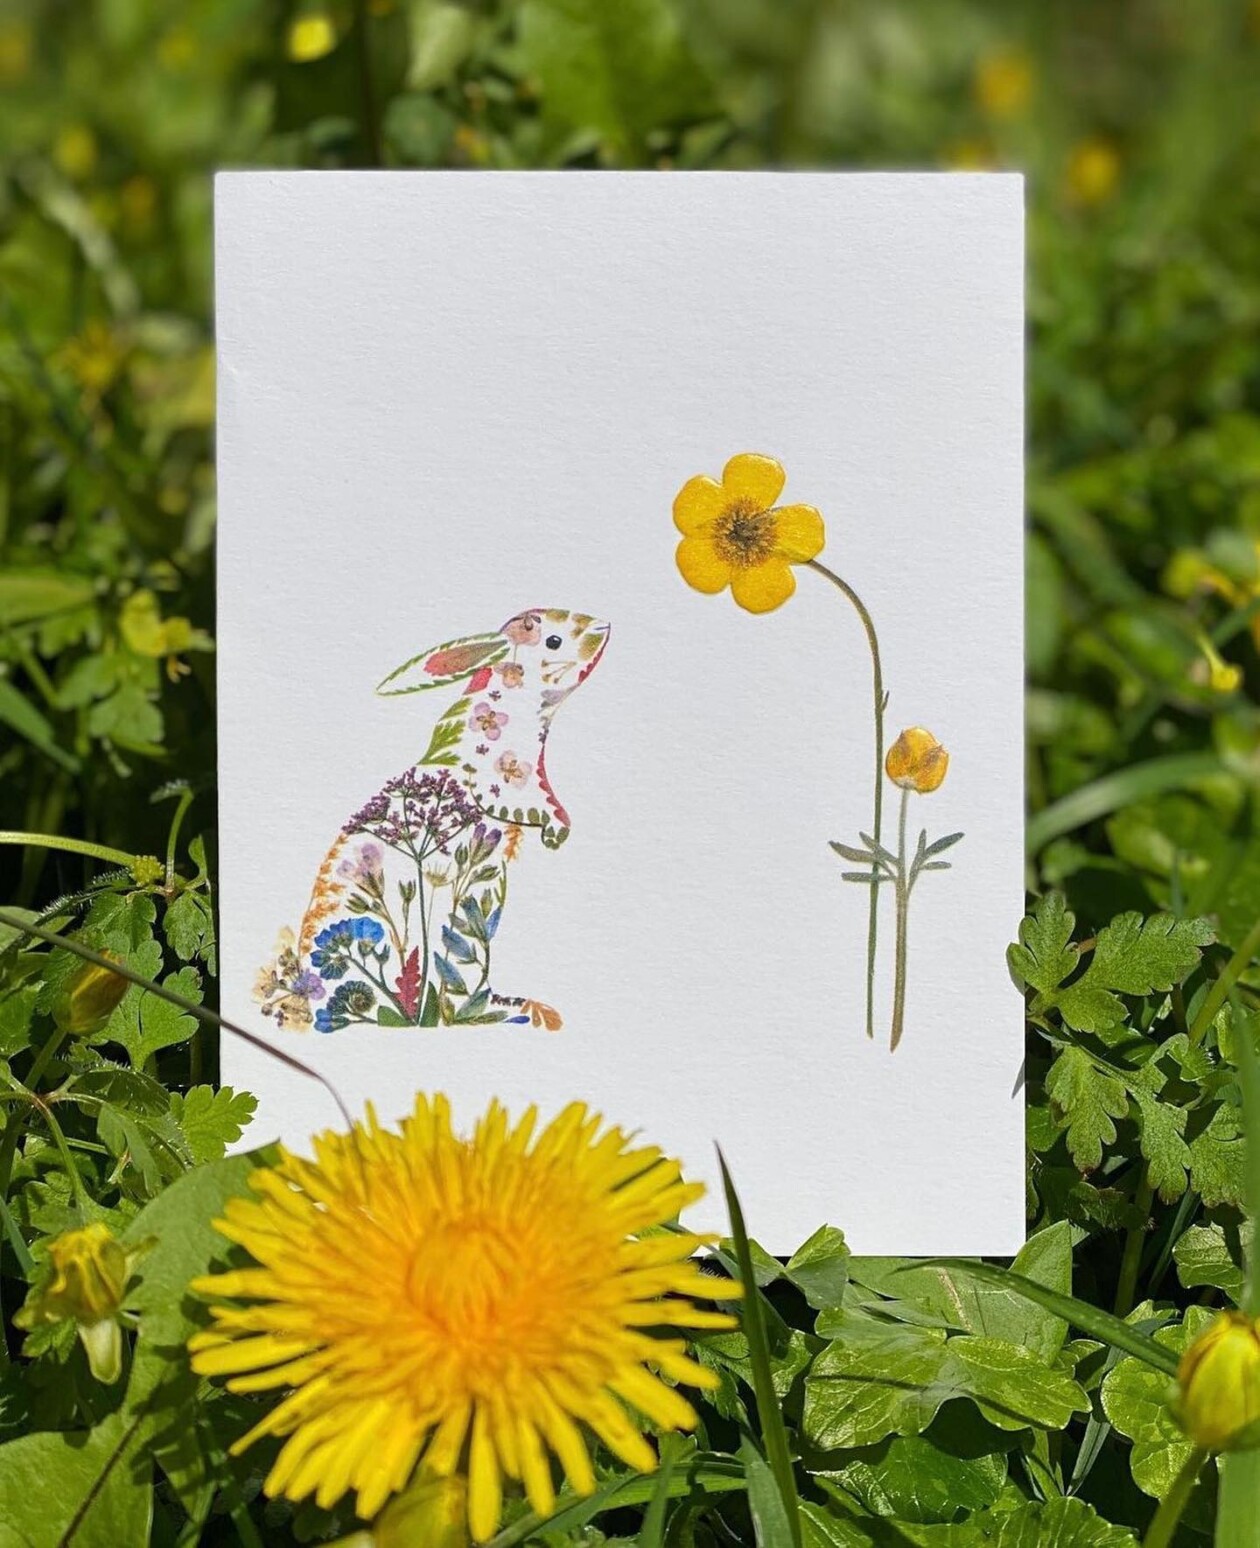 Illustrations Made Of Pressed Leaves And Flowers By Helen Ahpornsiri (16)